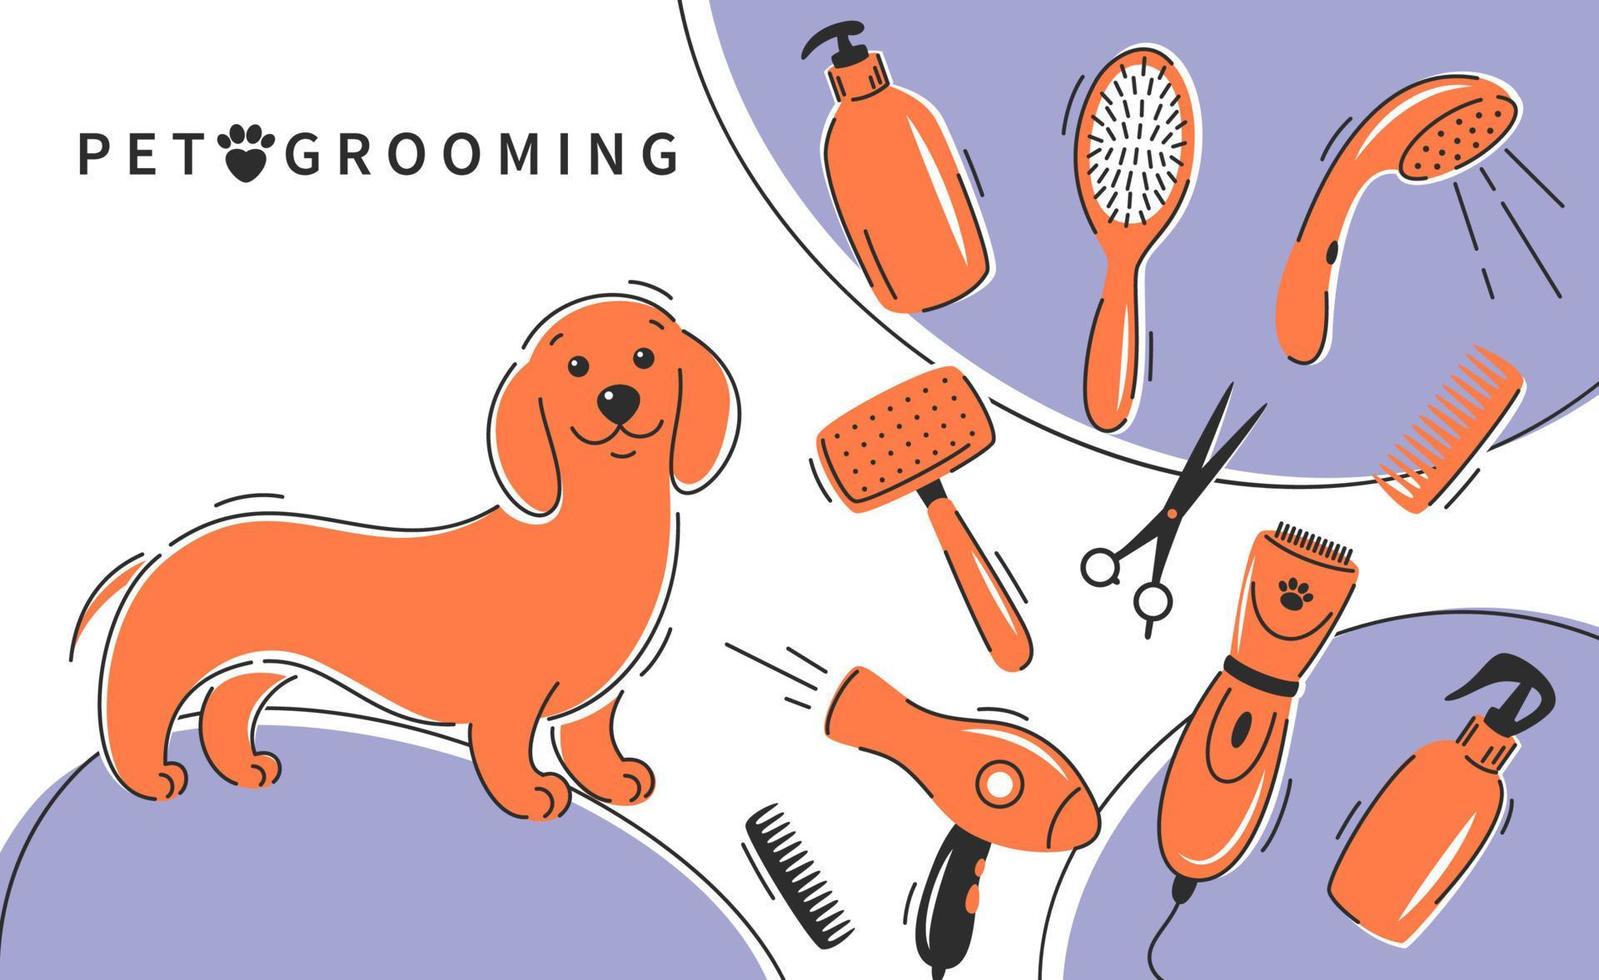 Pet grooming. Cute dog with different tools for animal hair grooming, haircuts, bathing, hygiene. Pet care salon concept. Vector illustration